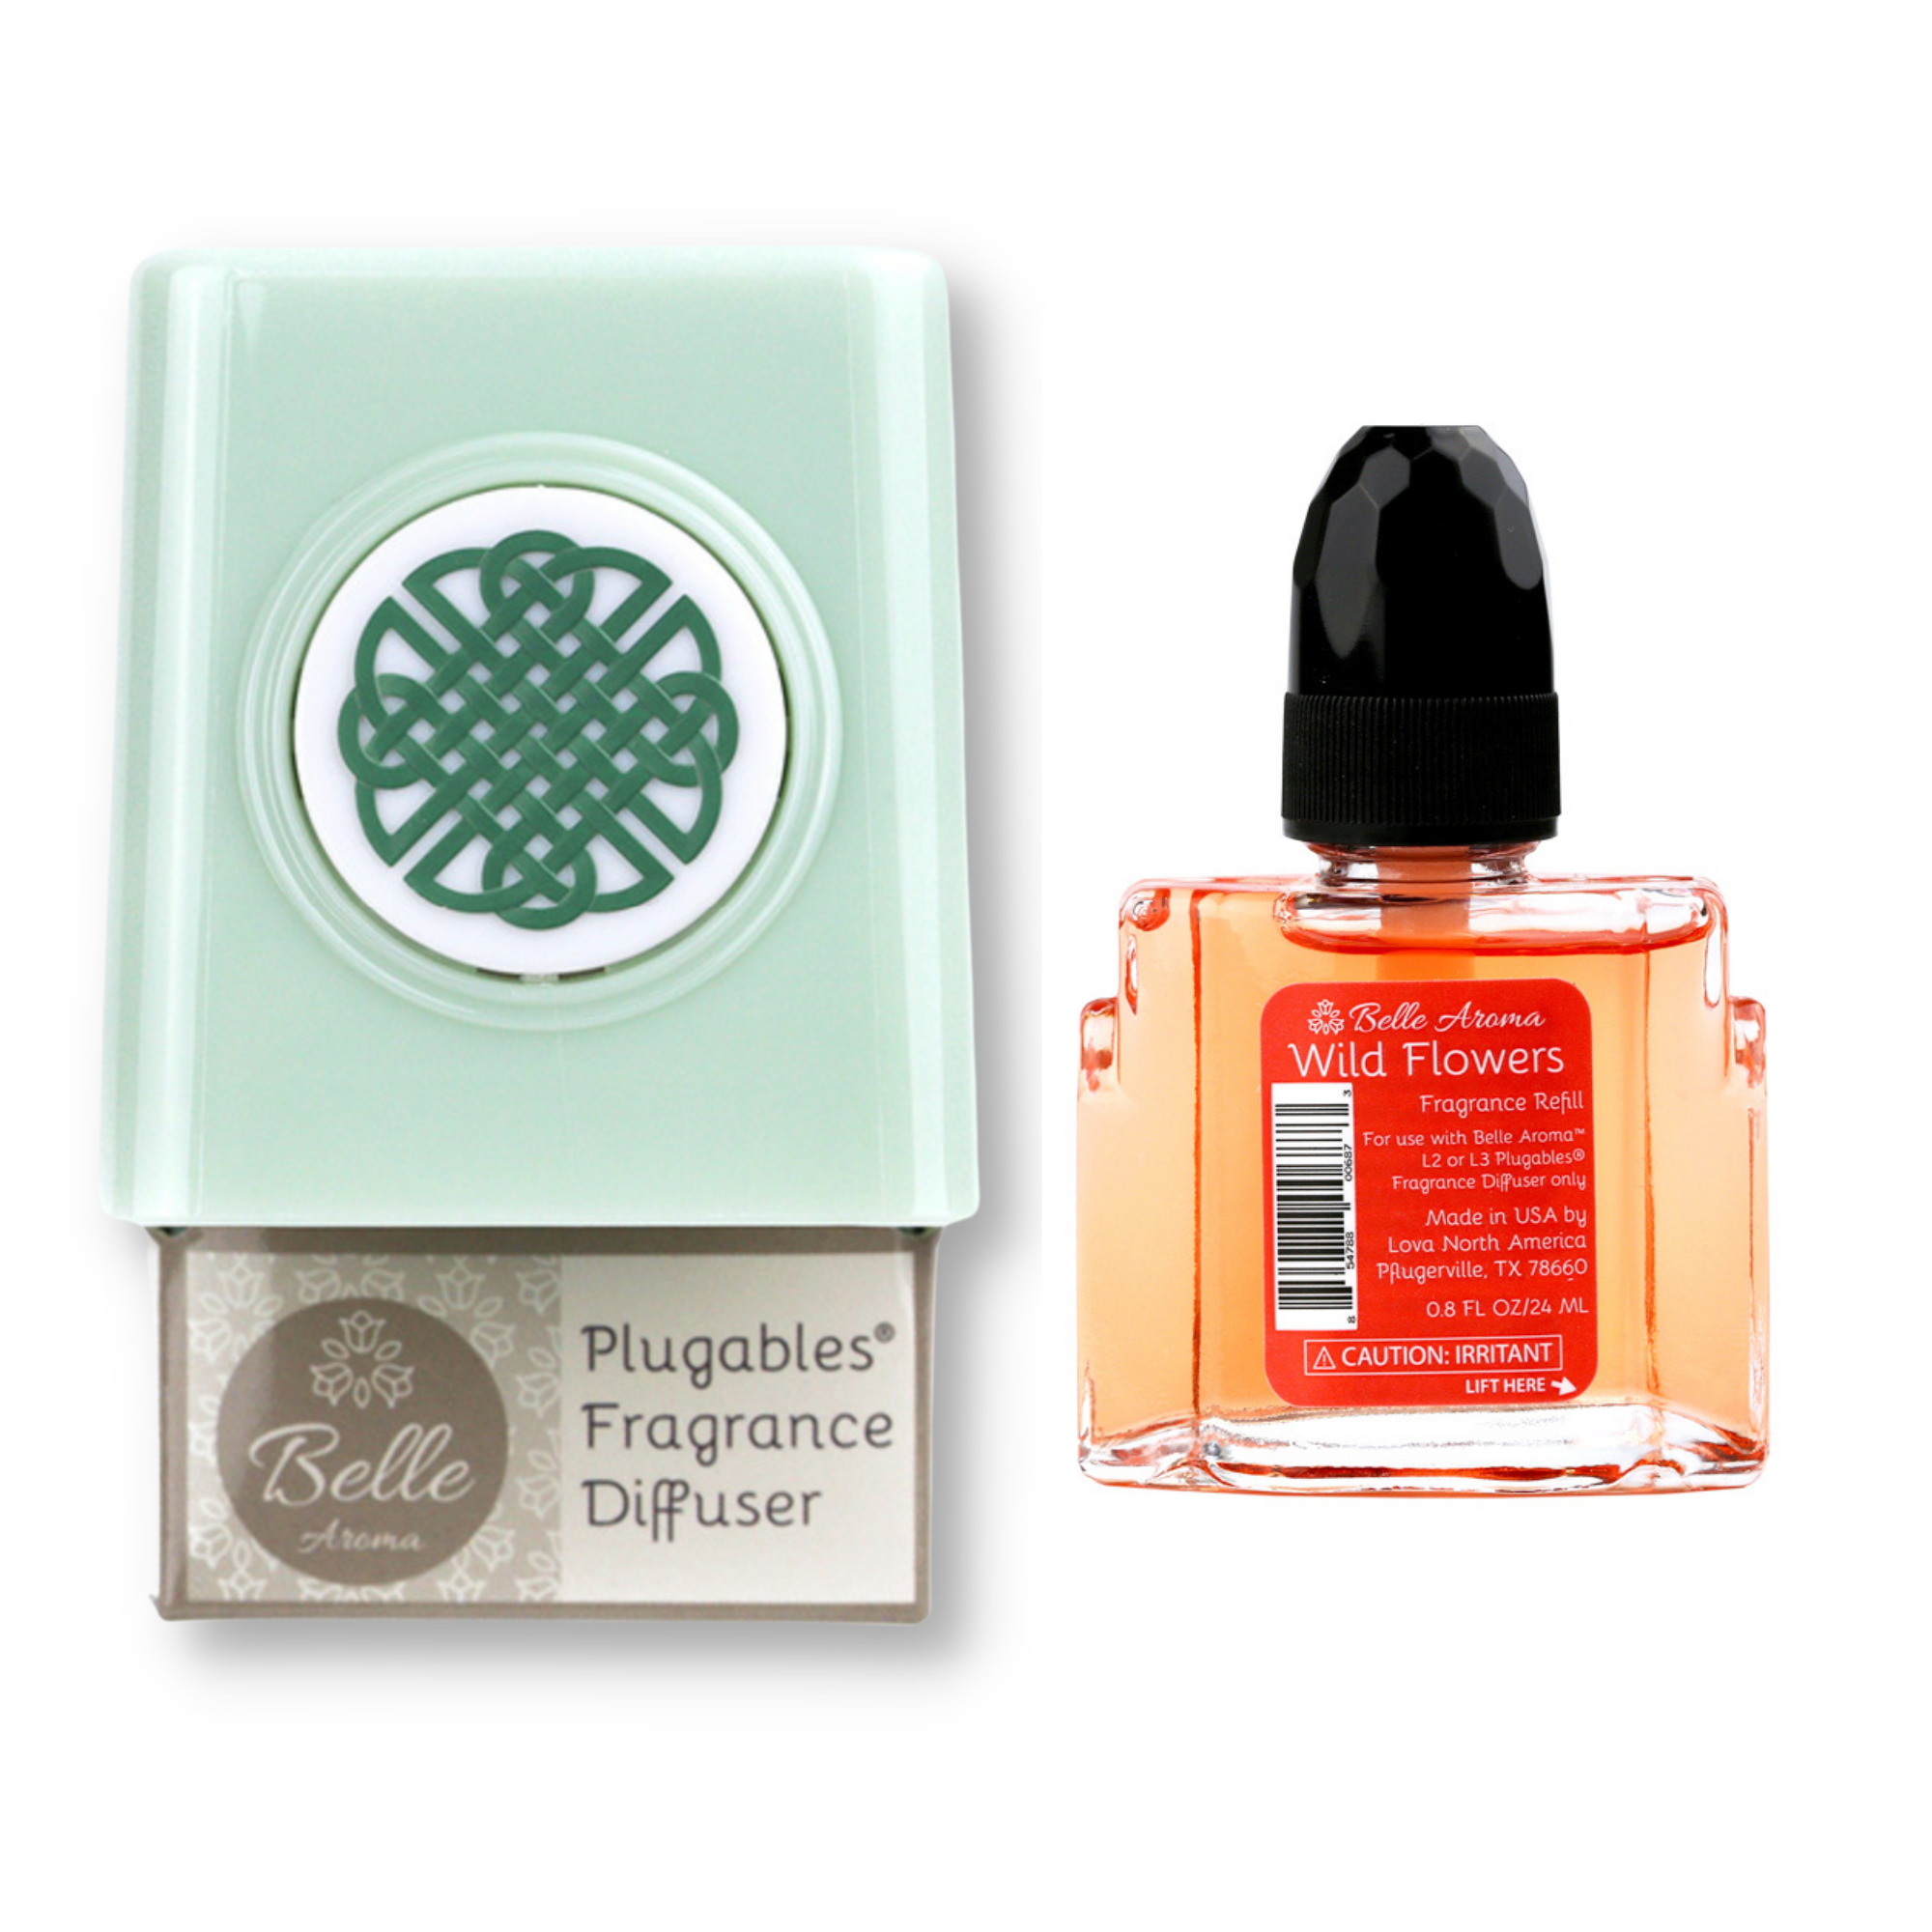 Celtic Knot Medallion Plugables® Plugin Electric Scented Oil Diffuser - Sea Glass with Wild Flowers Fragrance Oil Home Fragrance Accessories